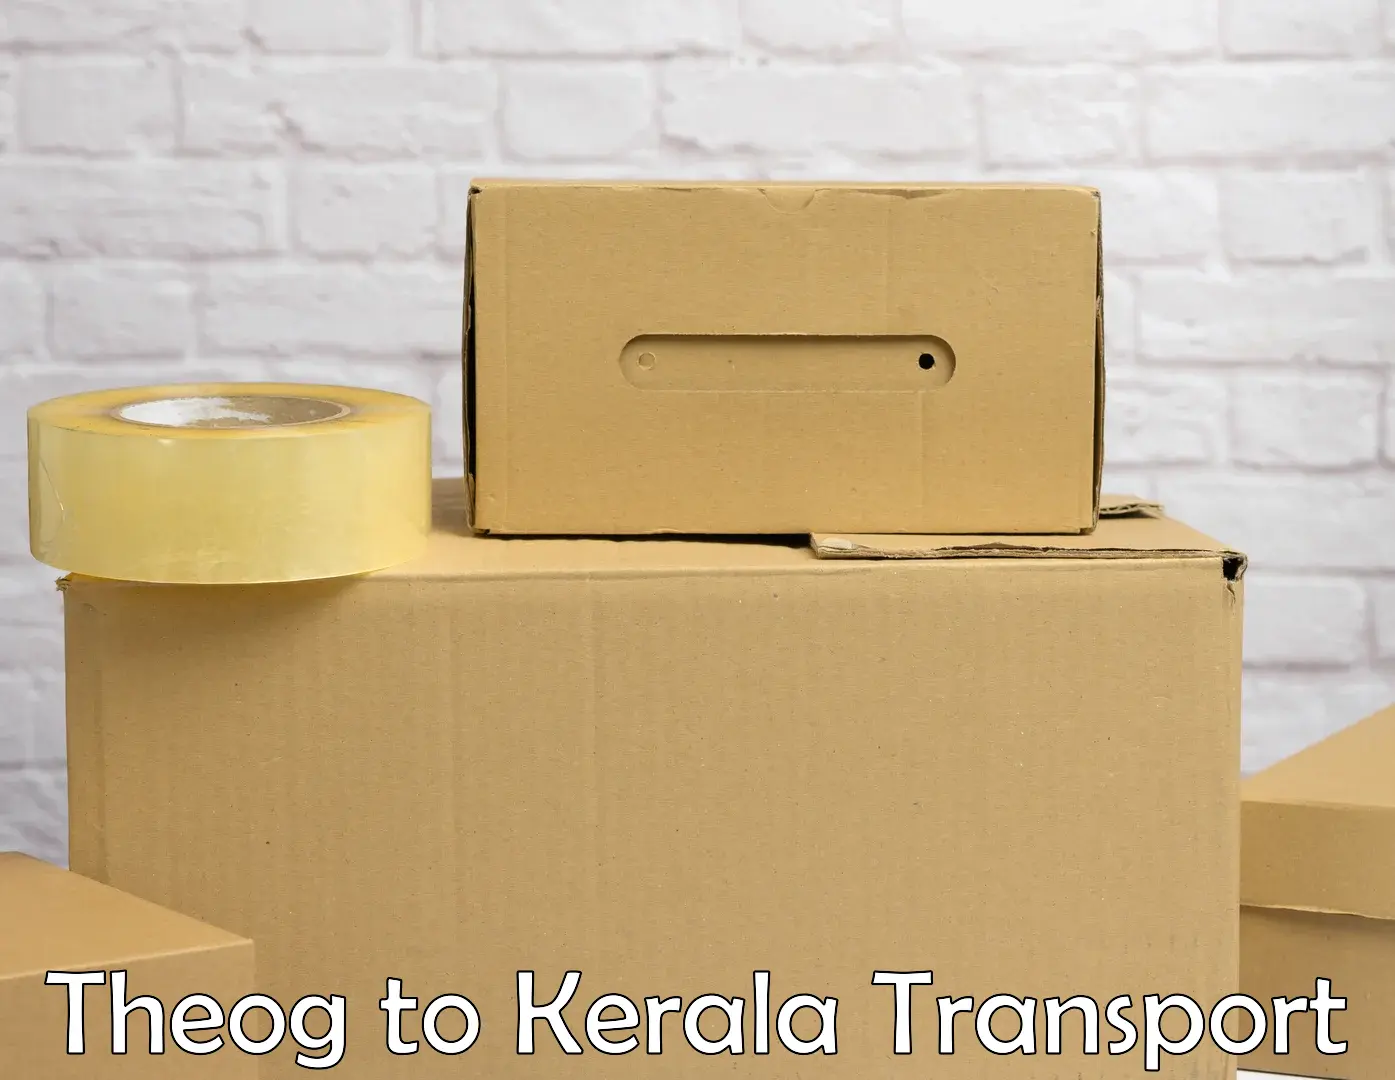 Commercial transport service Theog to Kerala